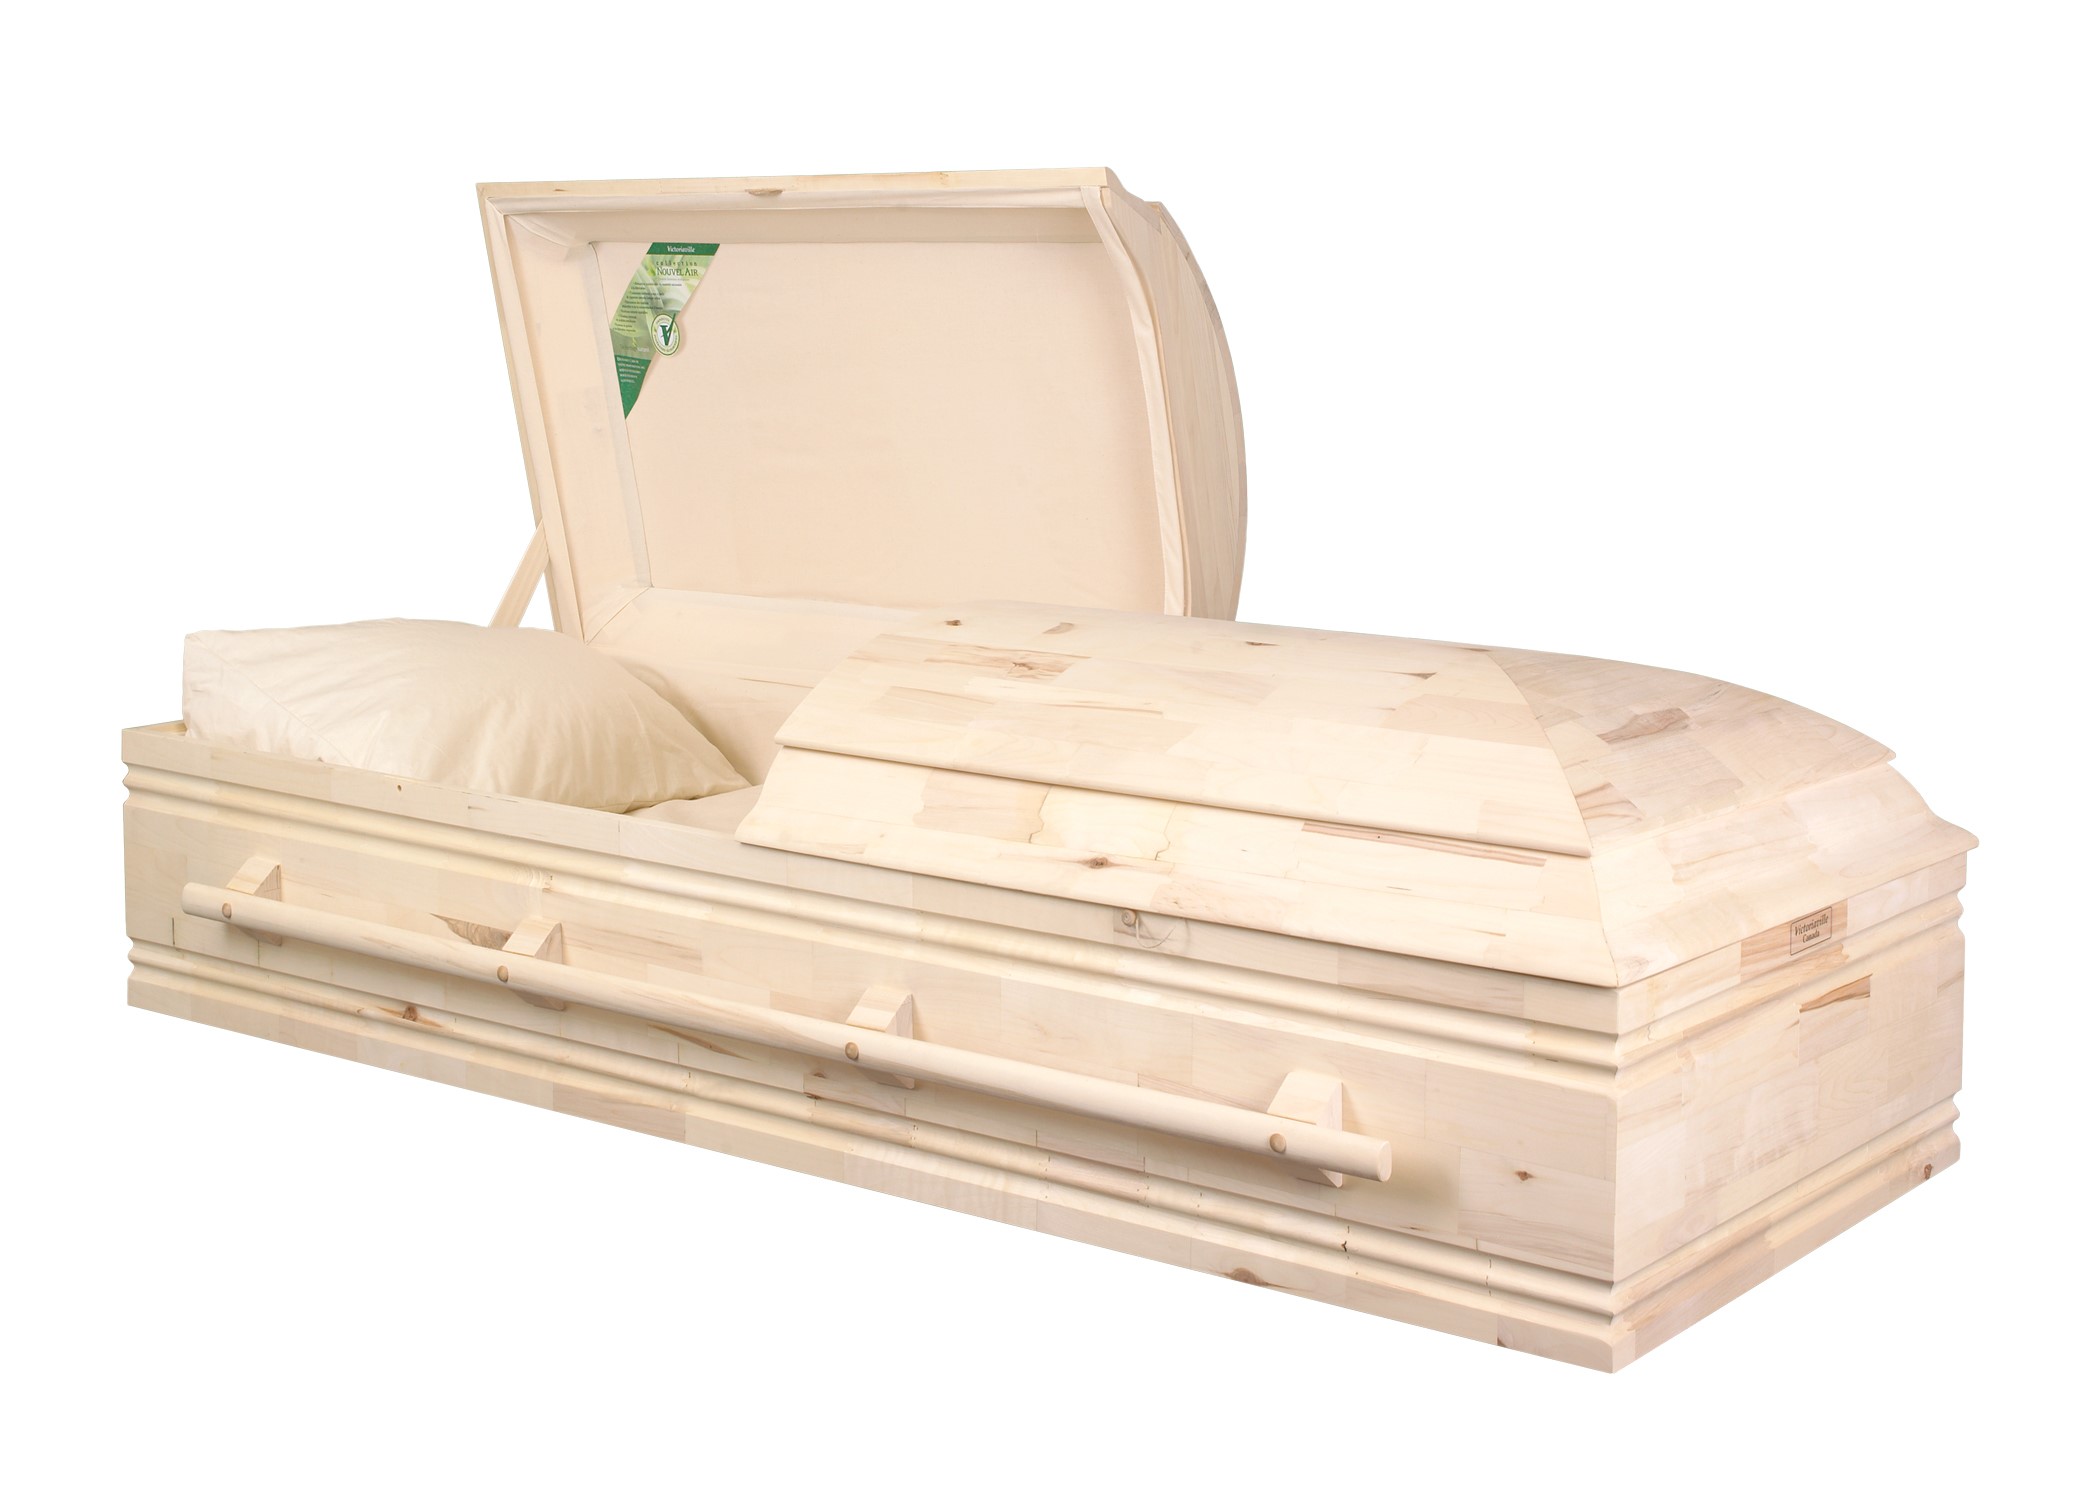 NATURA
Poplar wood casket,finger-joined construction
Natural finah without colour treatment
Natural cotton interior with excelsior bed